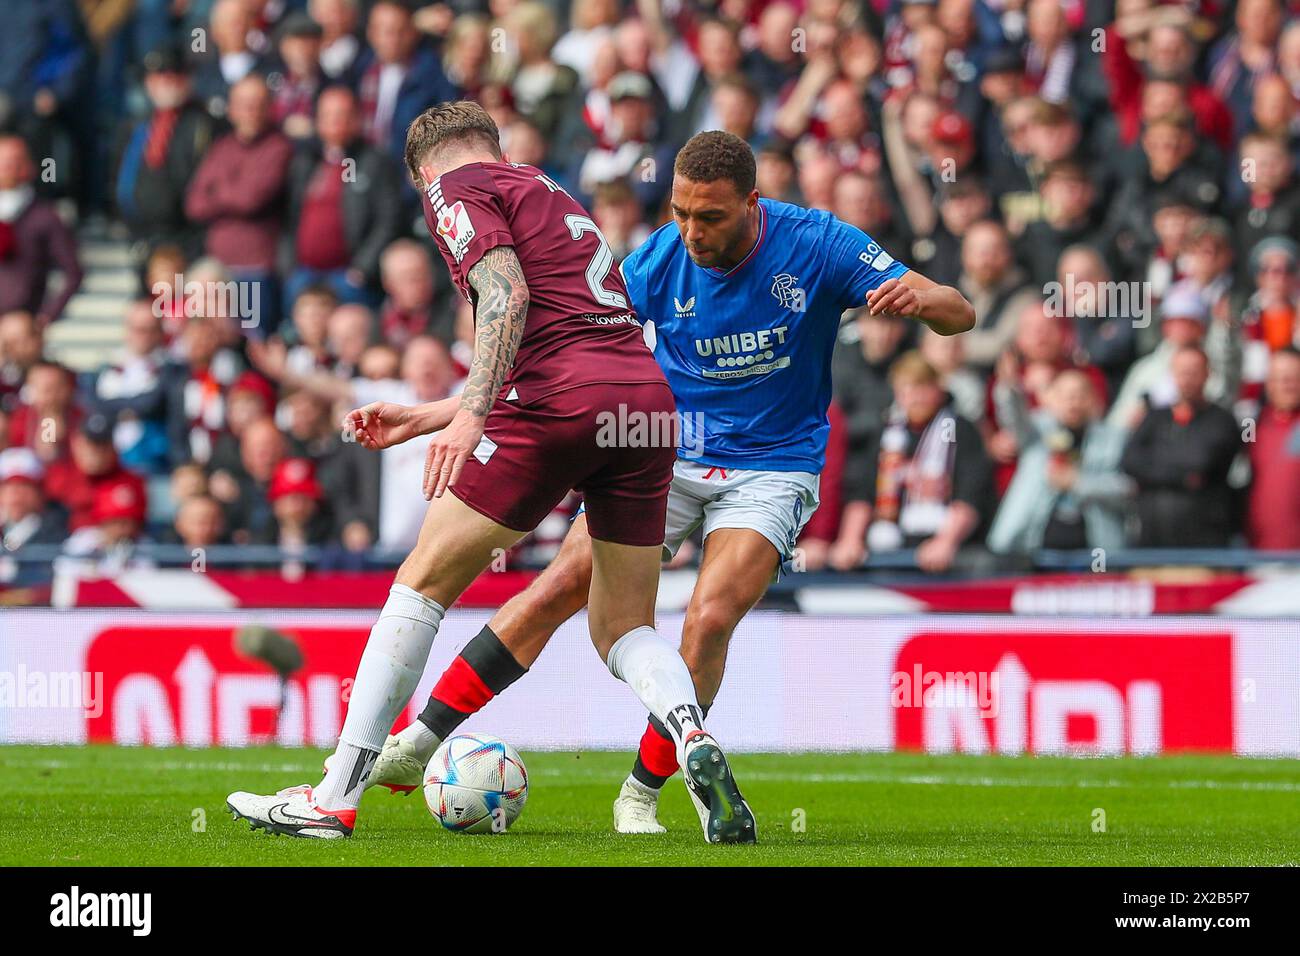 Glasgow, UK. 21st Apr, 2024. Rangers play Heart of Midlothian at Hampden Park football stadium, Glasgow, Scotland, UK in a semi final of the Scottish Cup. The winner of this game will play Celtic FC in the final. Credit: Findlay/Alamy Live News Stock Photo